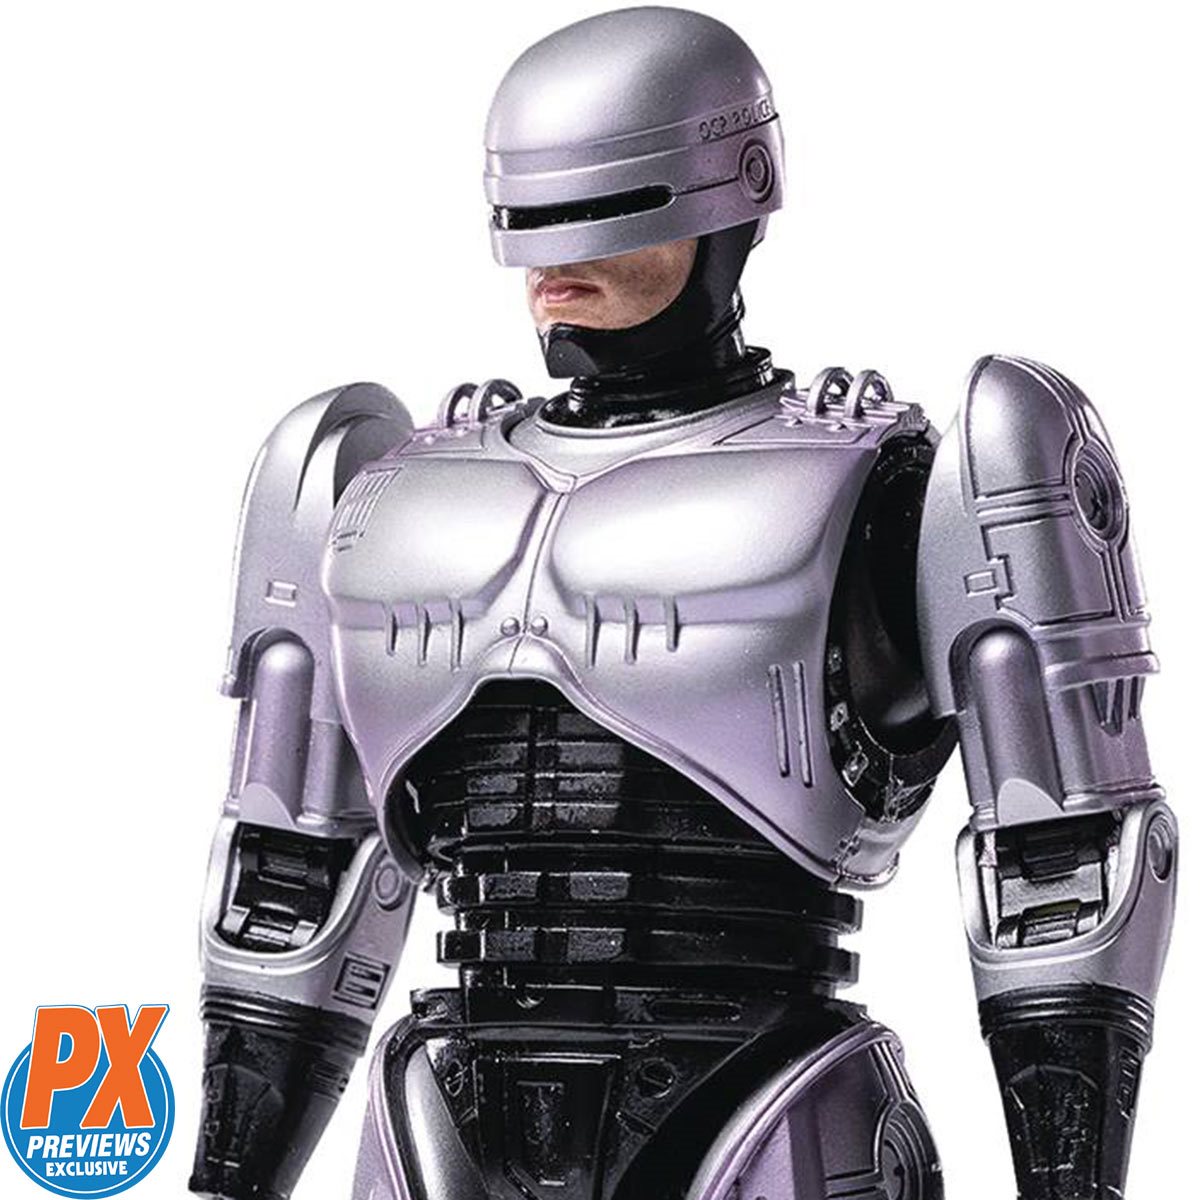 You Can Watch RoboCop for Free on the Big Screen on Its 35th